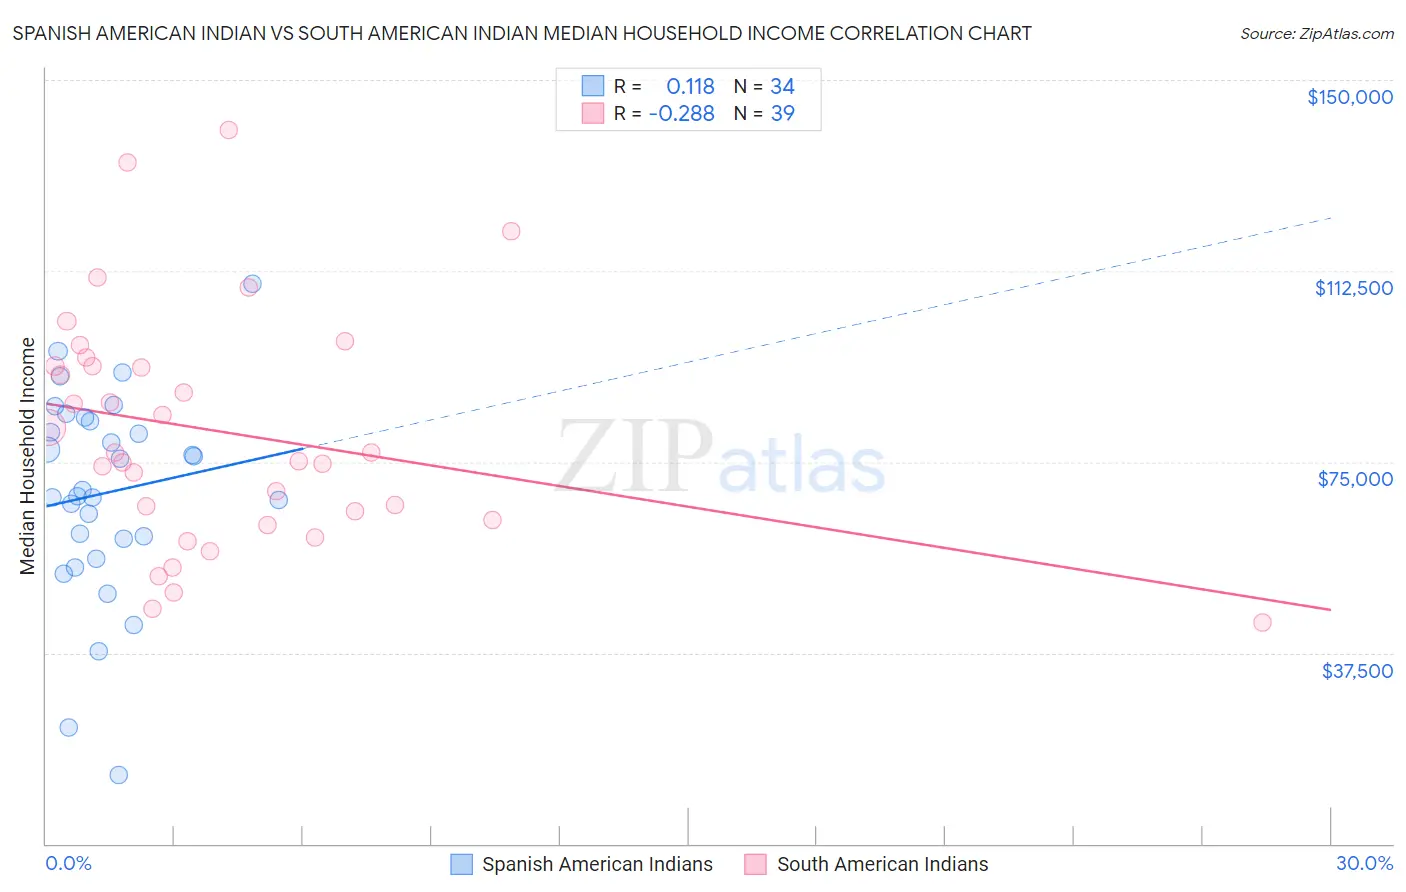 Spanish American Indian vs South American Indian Median Household Income